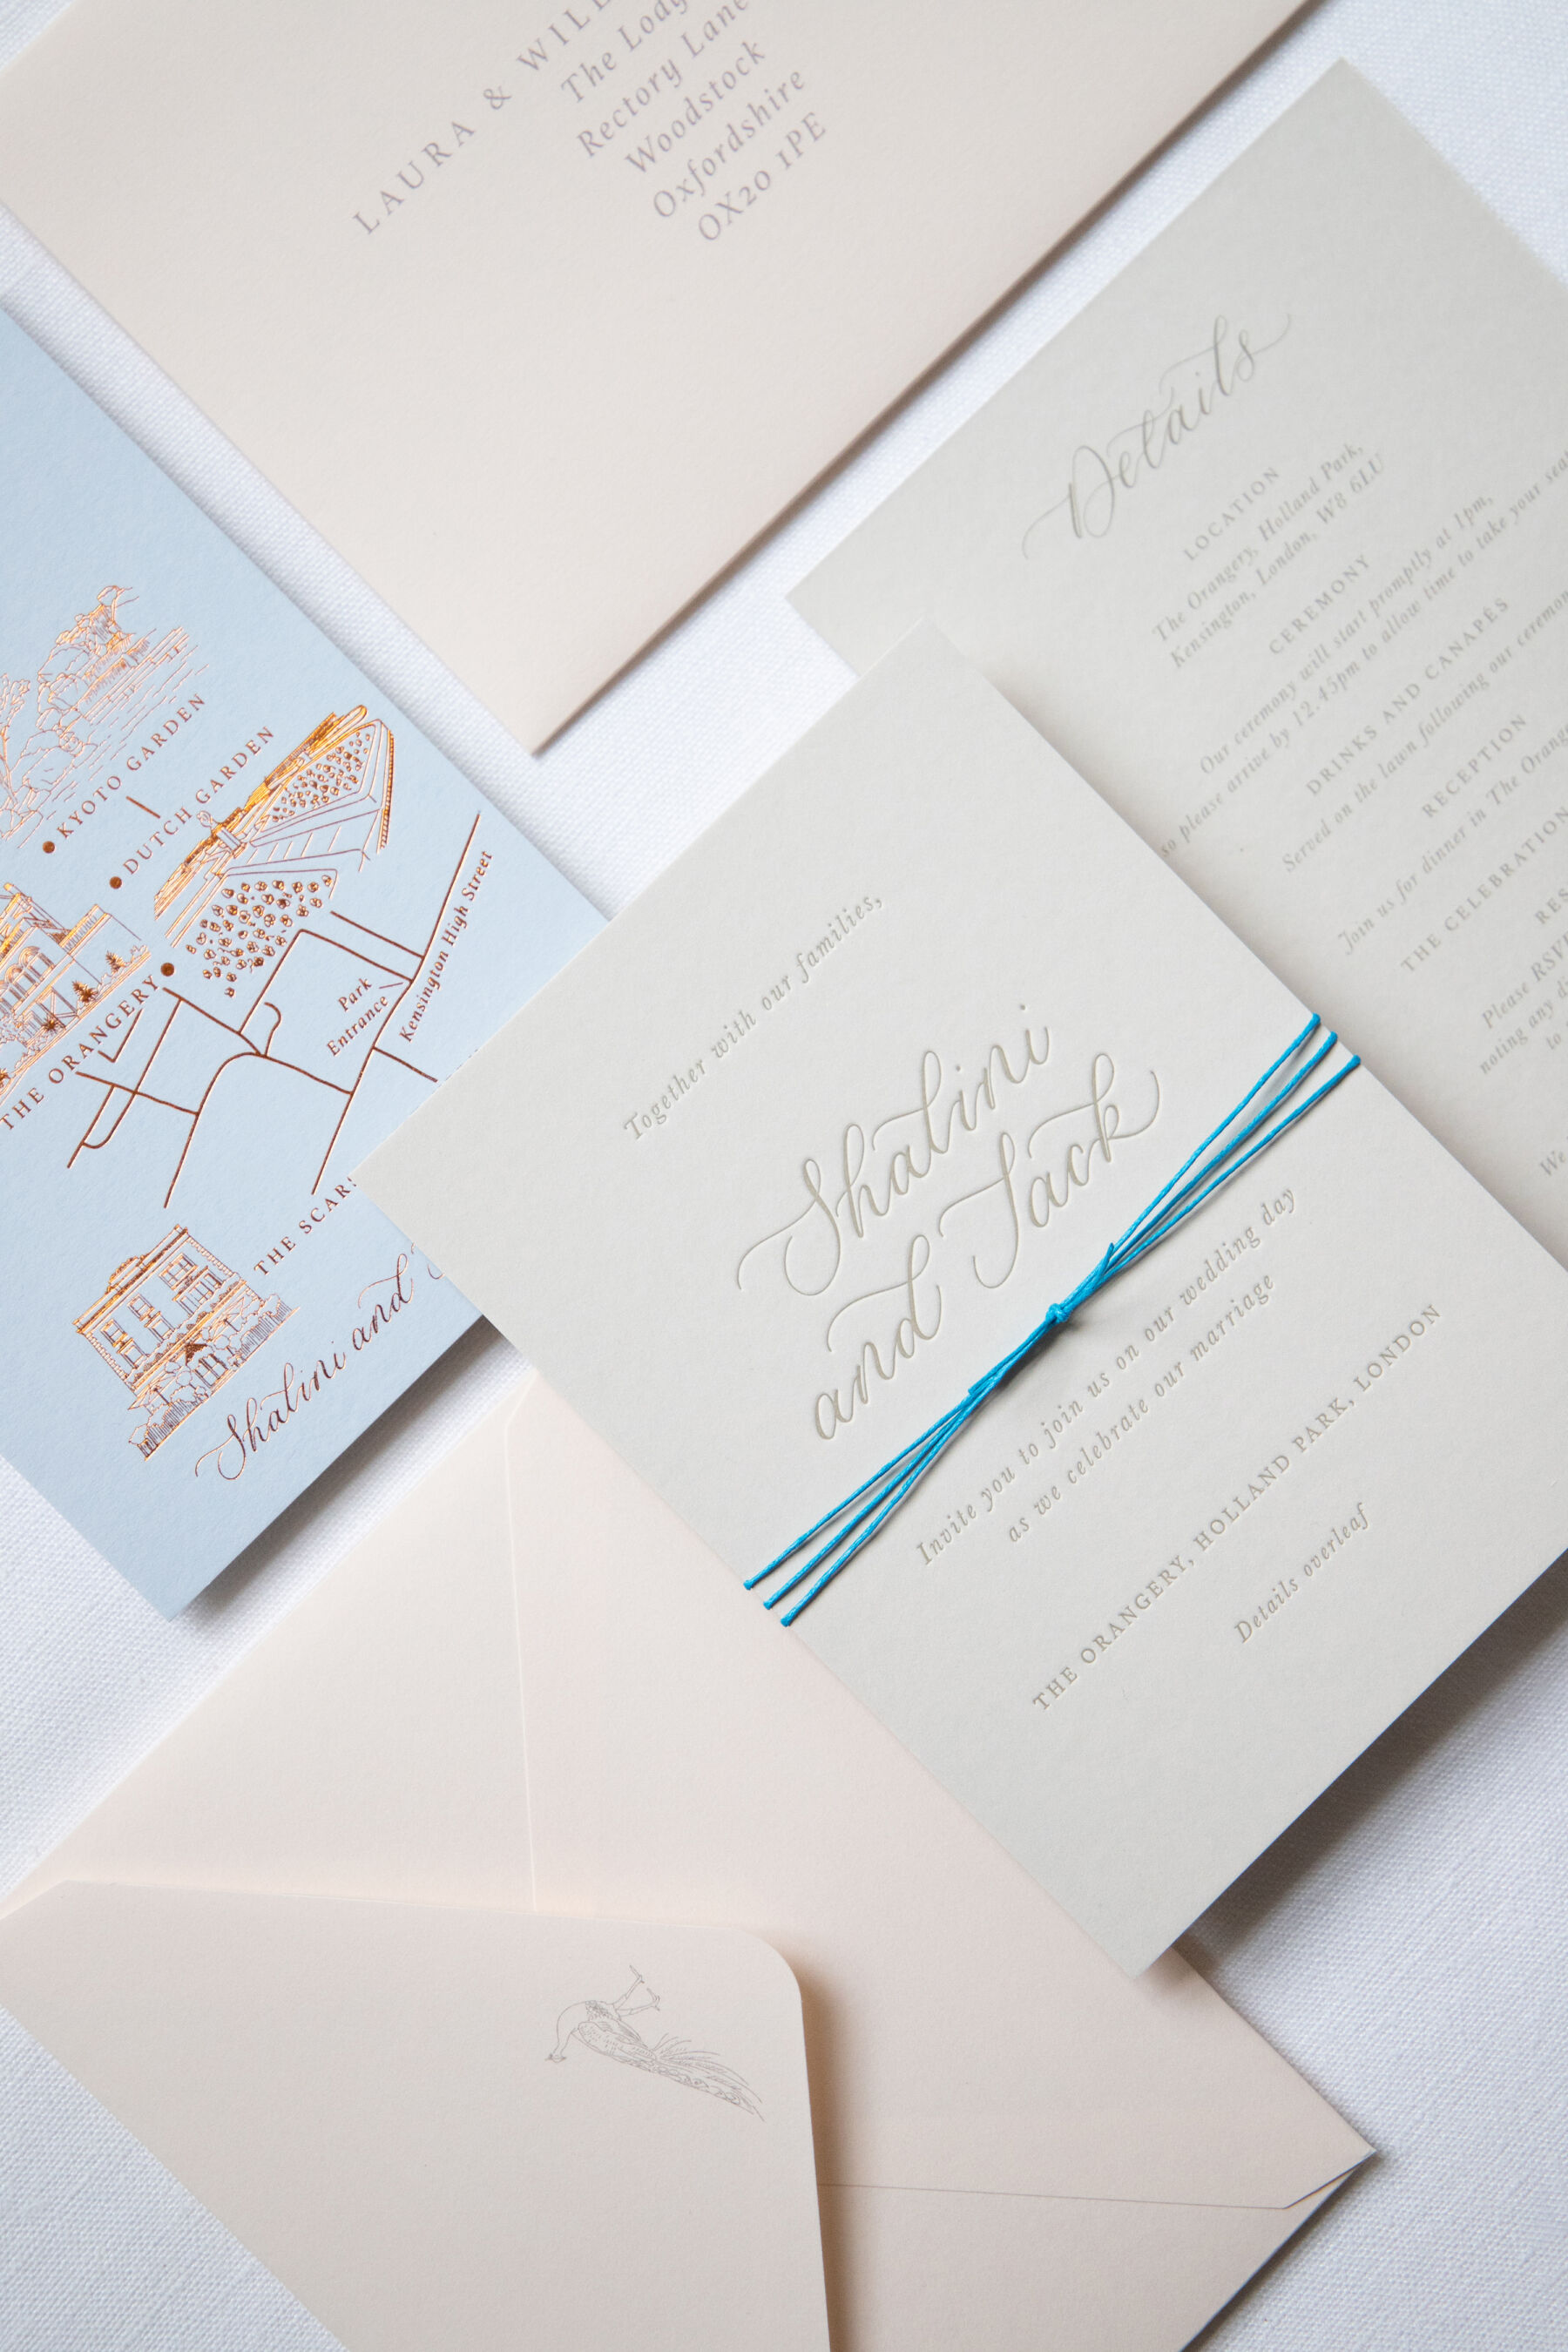 Bespoke letterpress printed wedding invitations, with a hand-drawn map of the gardens at Holland Park.